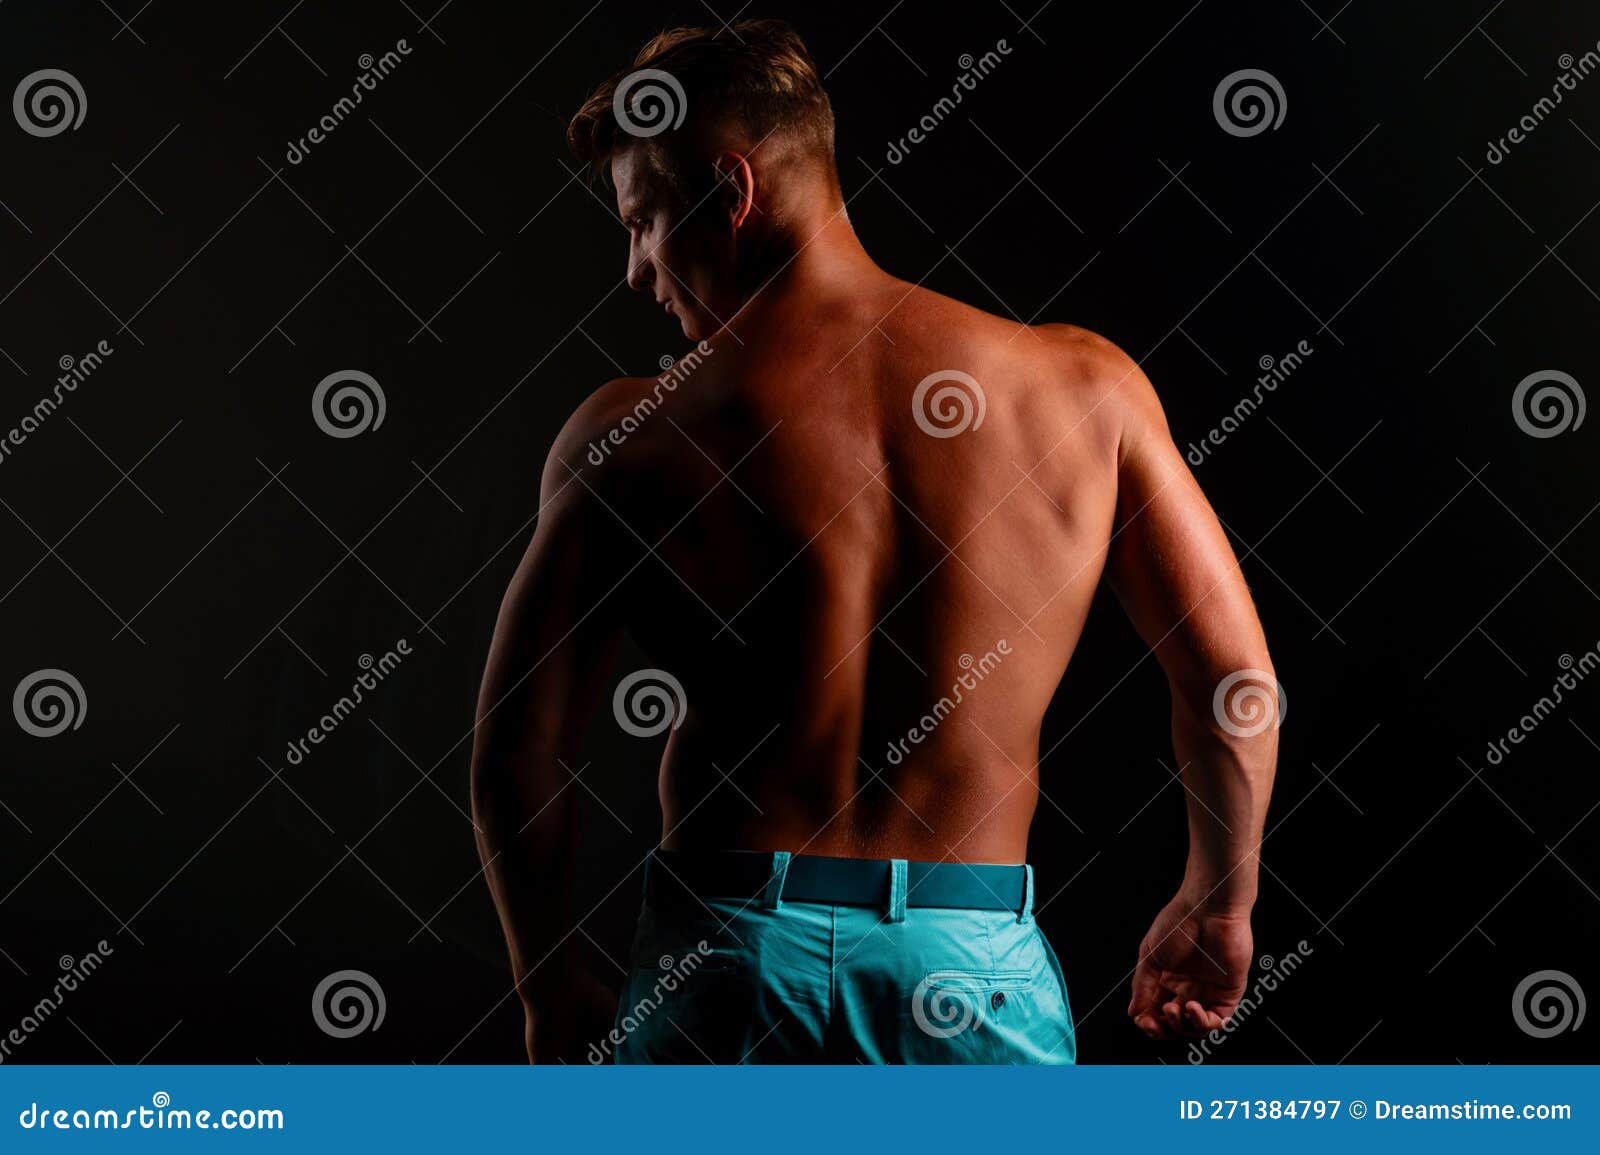 Naked Man Back Nude Male Torso Sexy Muscular Guy Topless Muscular